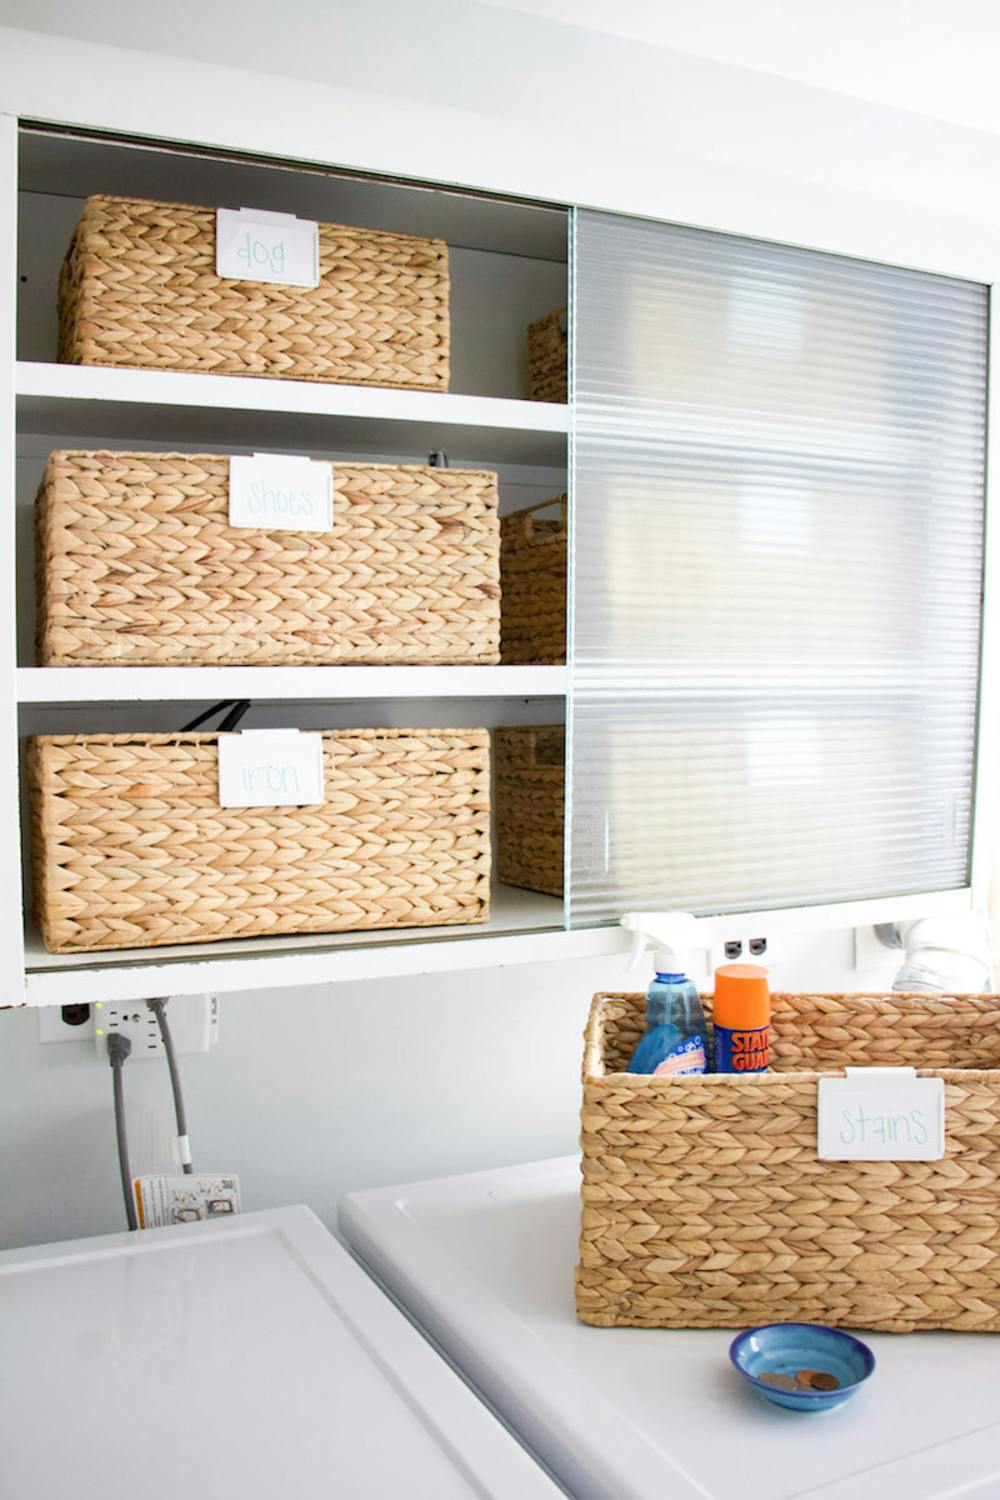 Laundry Room Shelves: Keep Everything Organized And Within Reach